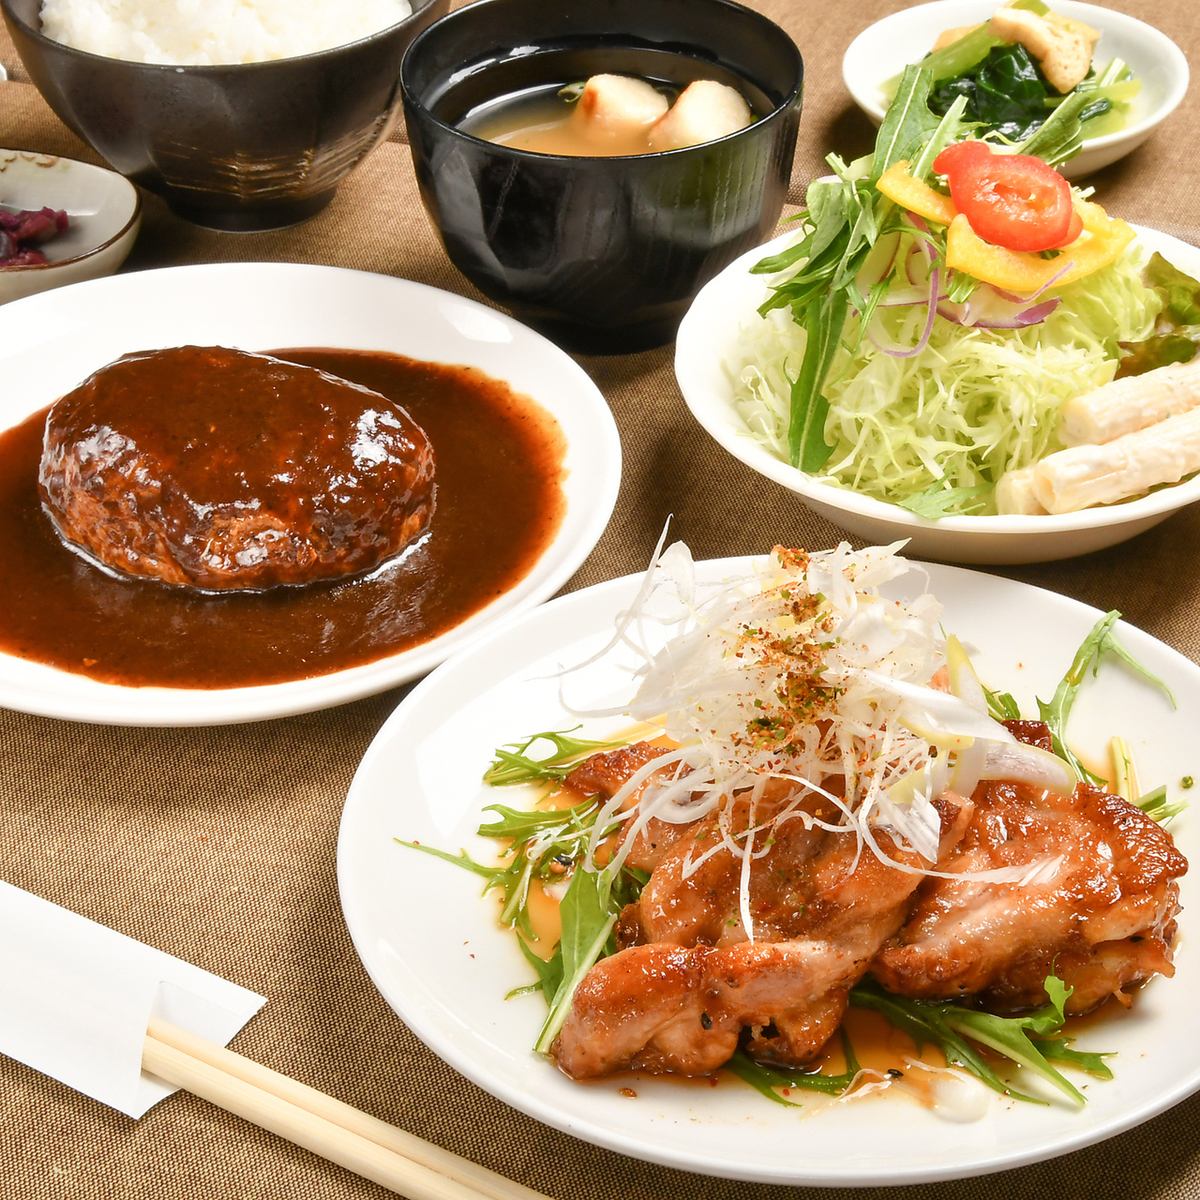 Students are welcome ♪ Enjoy Western food at a reasonable price!